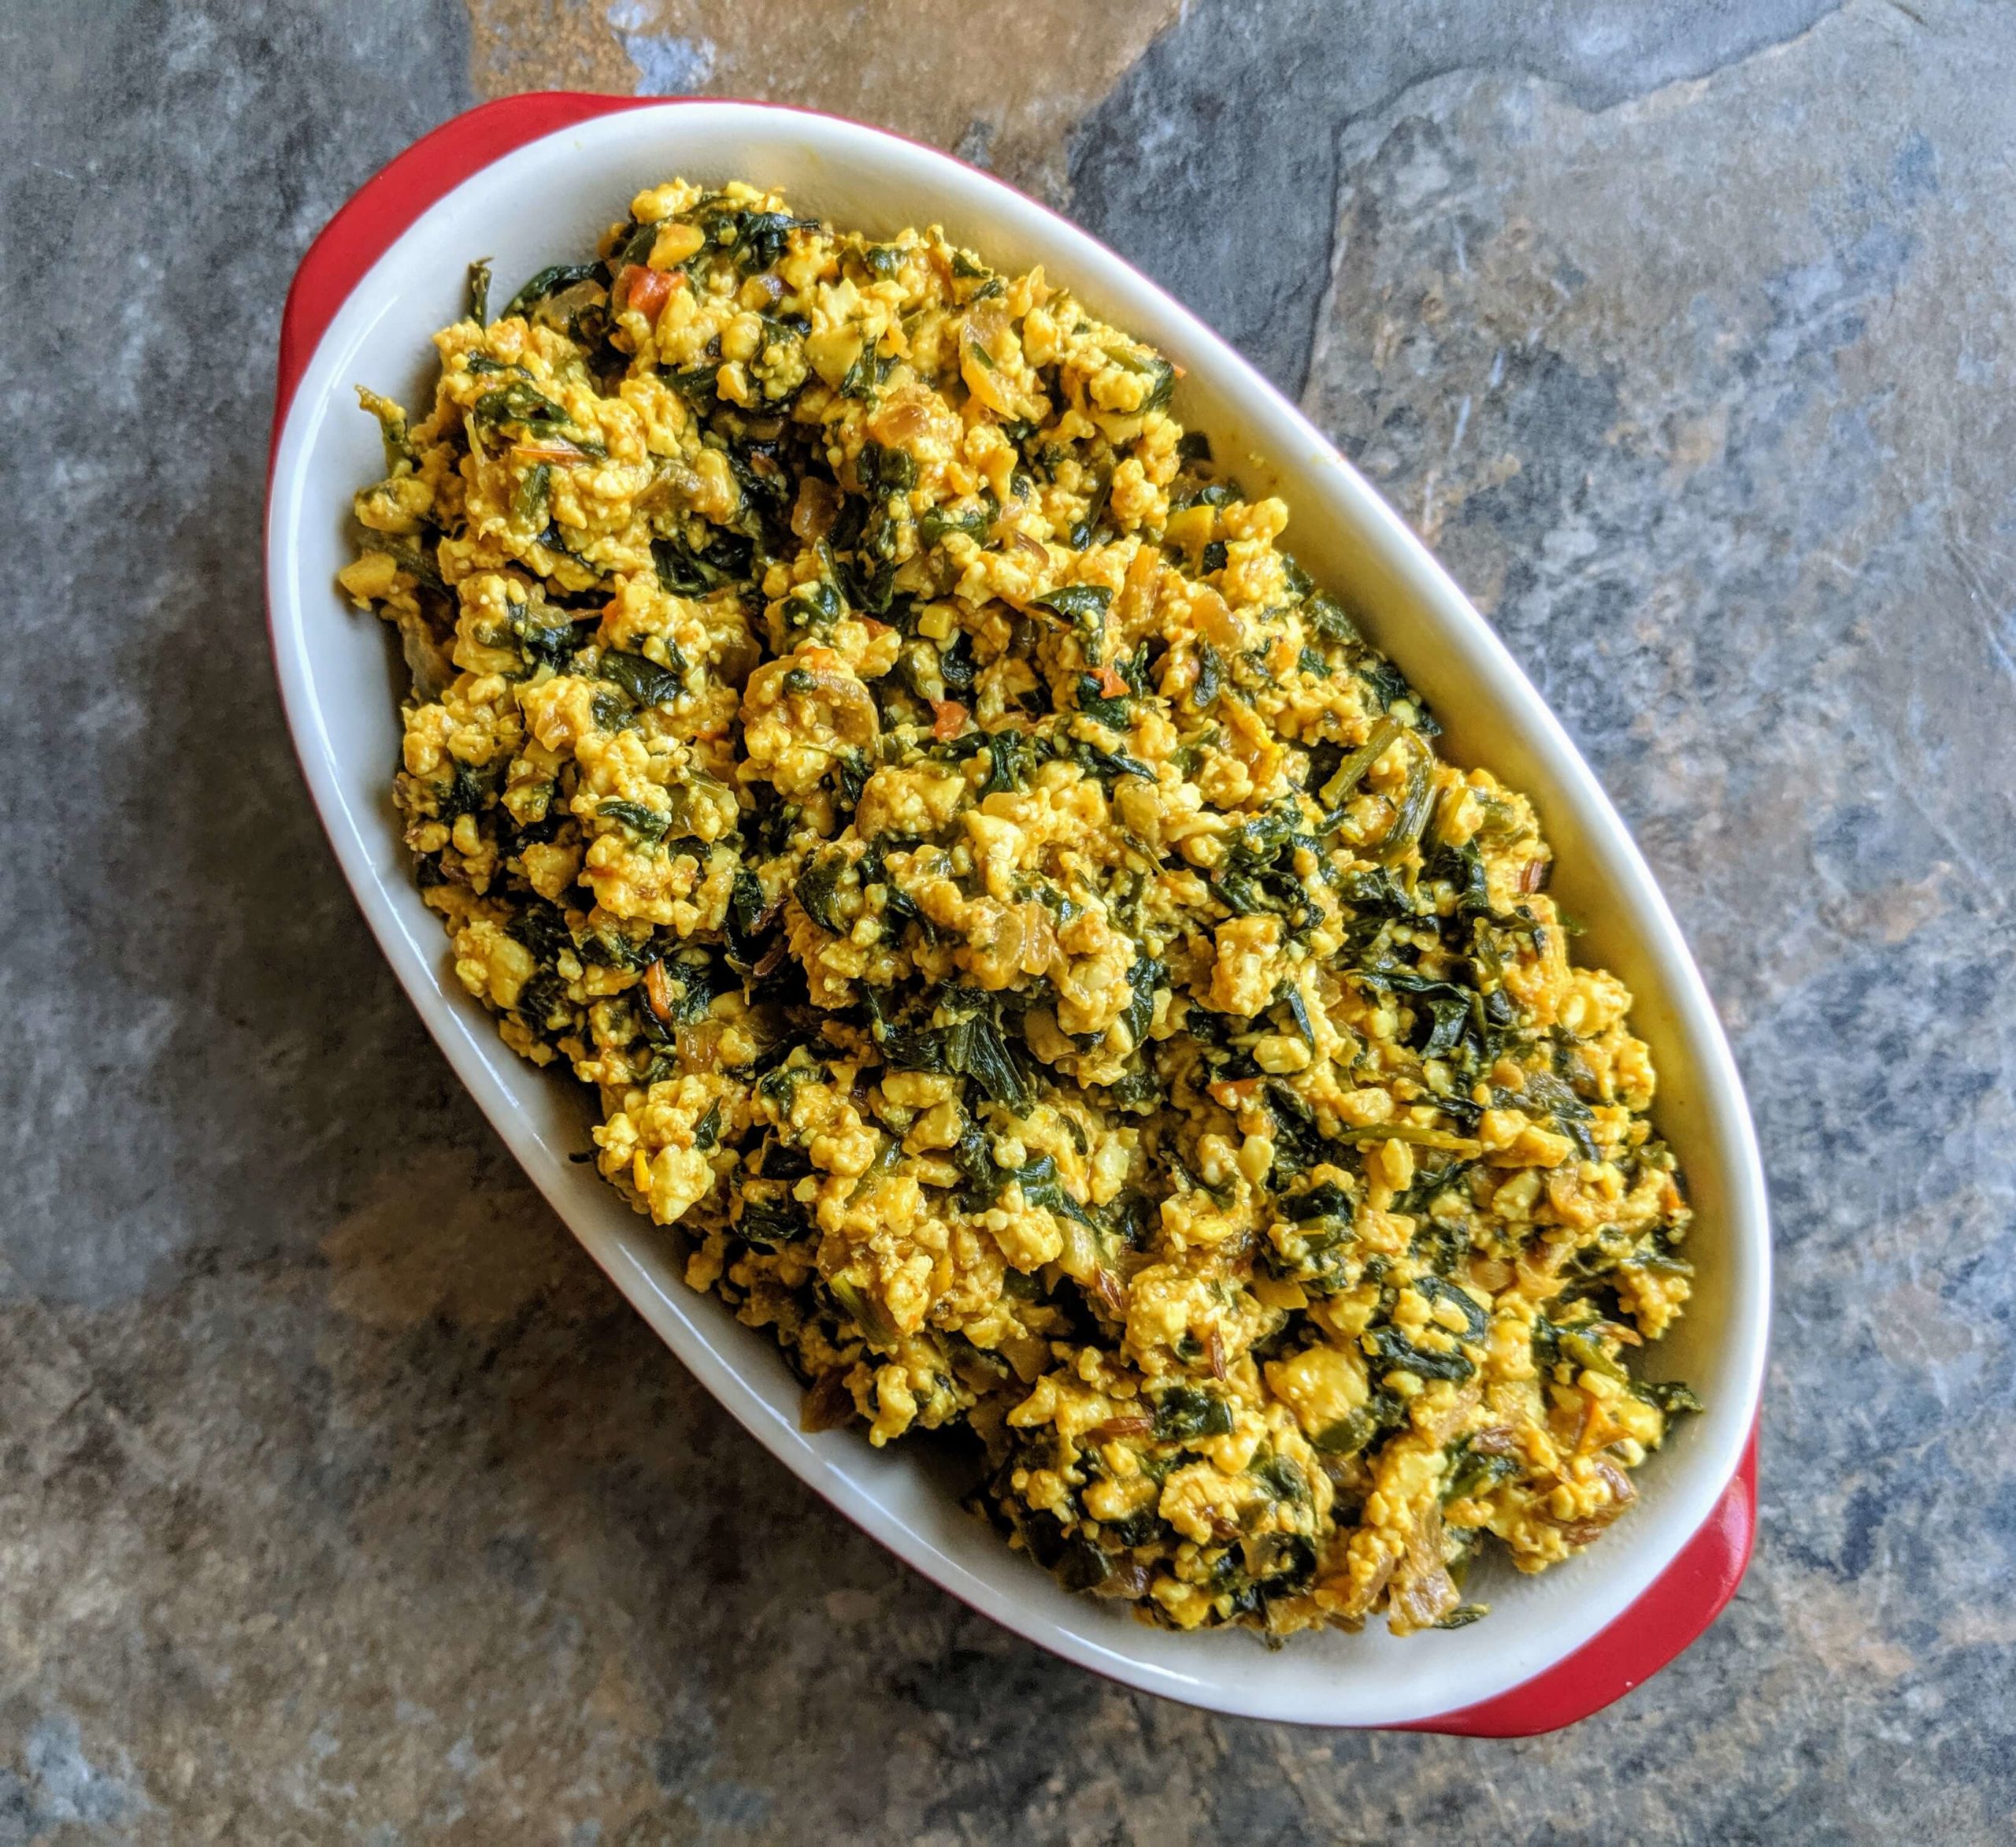 Palak Paneer Bhurji is an Indian dish made with spinach and scrambled paneer. It is a healthy & flavorful dish which can be made in minutes.